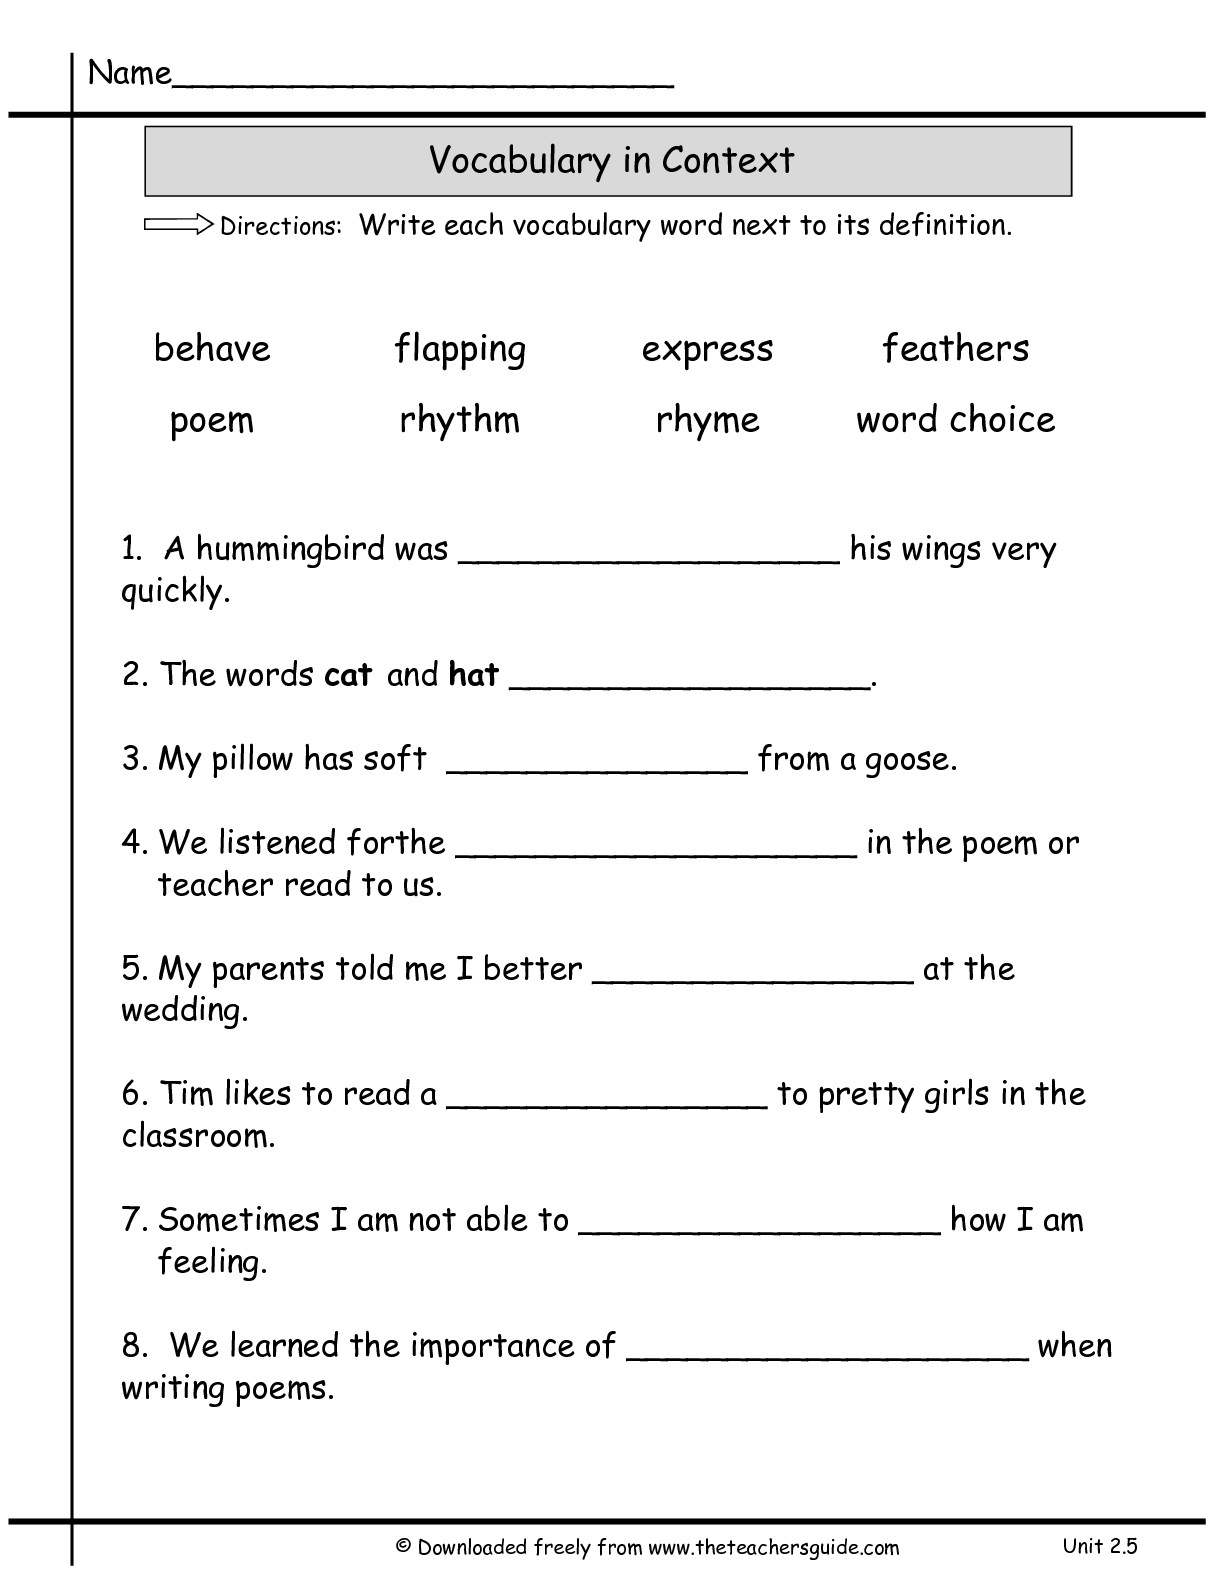 16-best-images-of-2nd-grade-vocabulary-words-worksheet-2nd-grade-vocabulary-worksheets-2nd